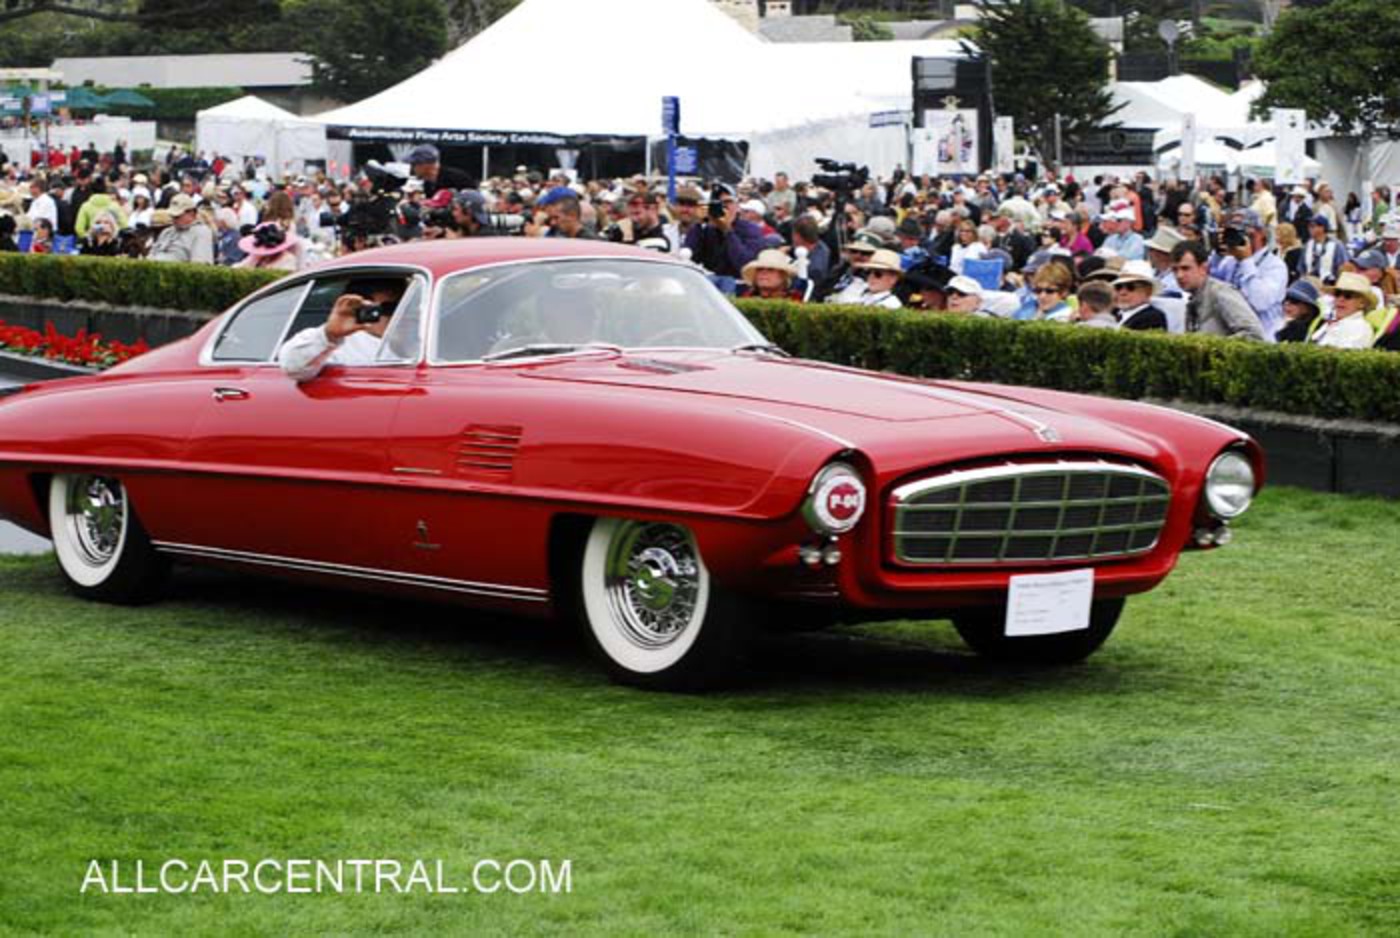 De Soto Diplomat 4dr Photo Gallery: Photo #08 out of 11, Image ...